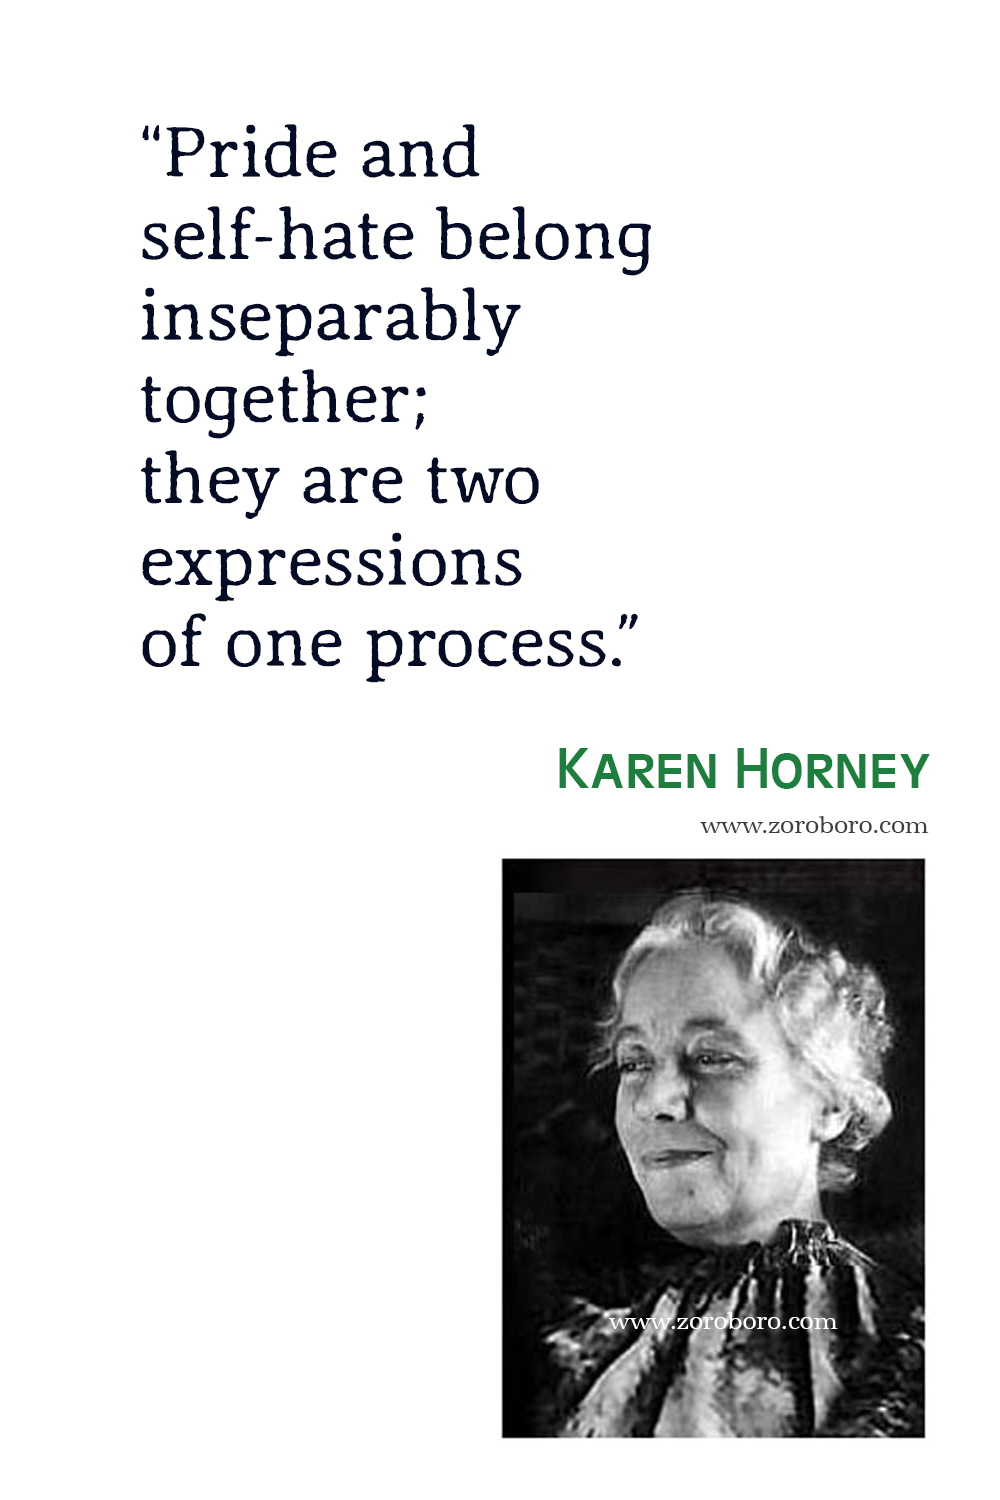 Karen Horney Quotes, Karen Horney Personality Theory, Karen Horney Feminist Psychology, Karen Horney Neurosis and Human Growth Quotes, Karen Horney Books Quotes.